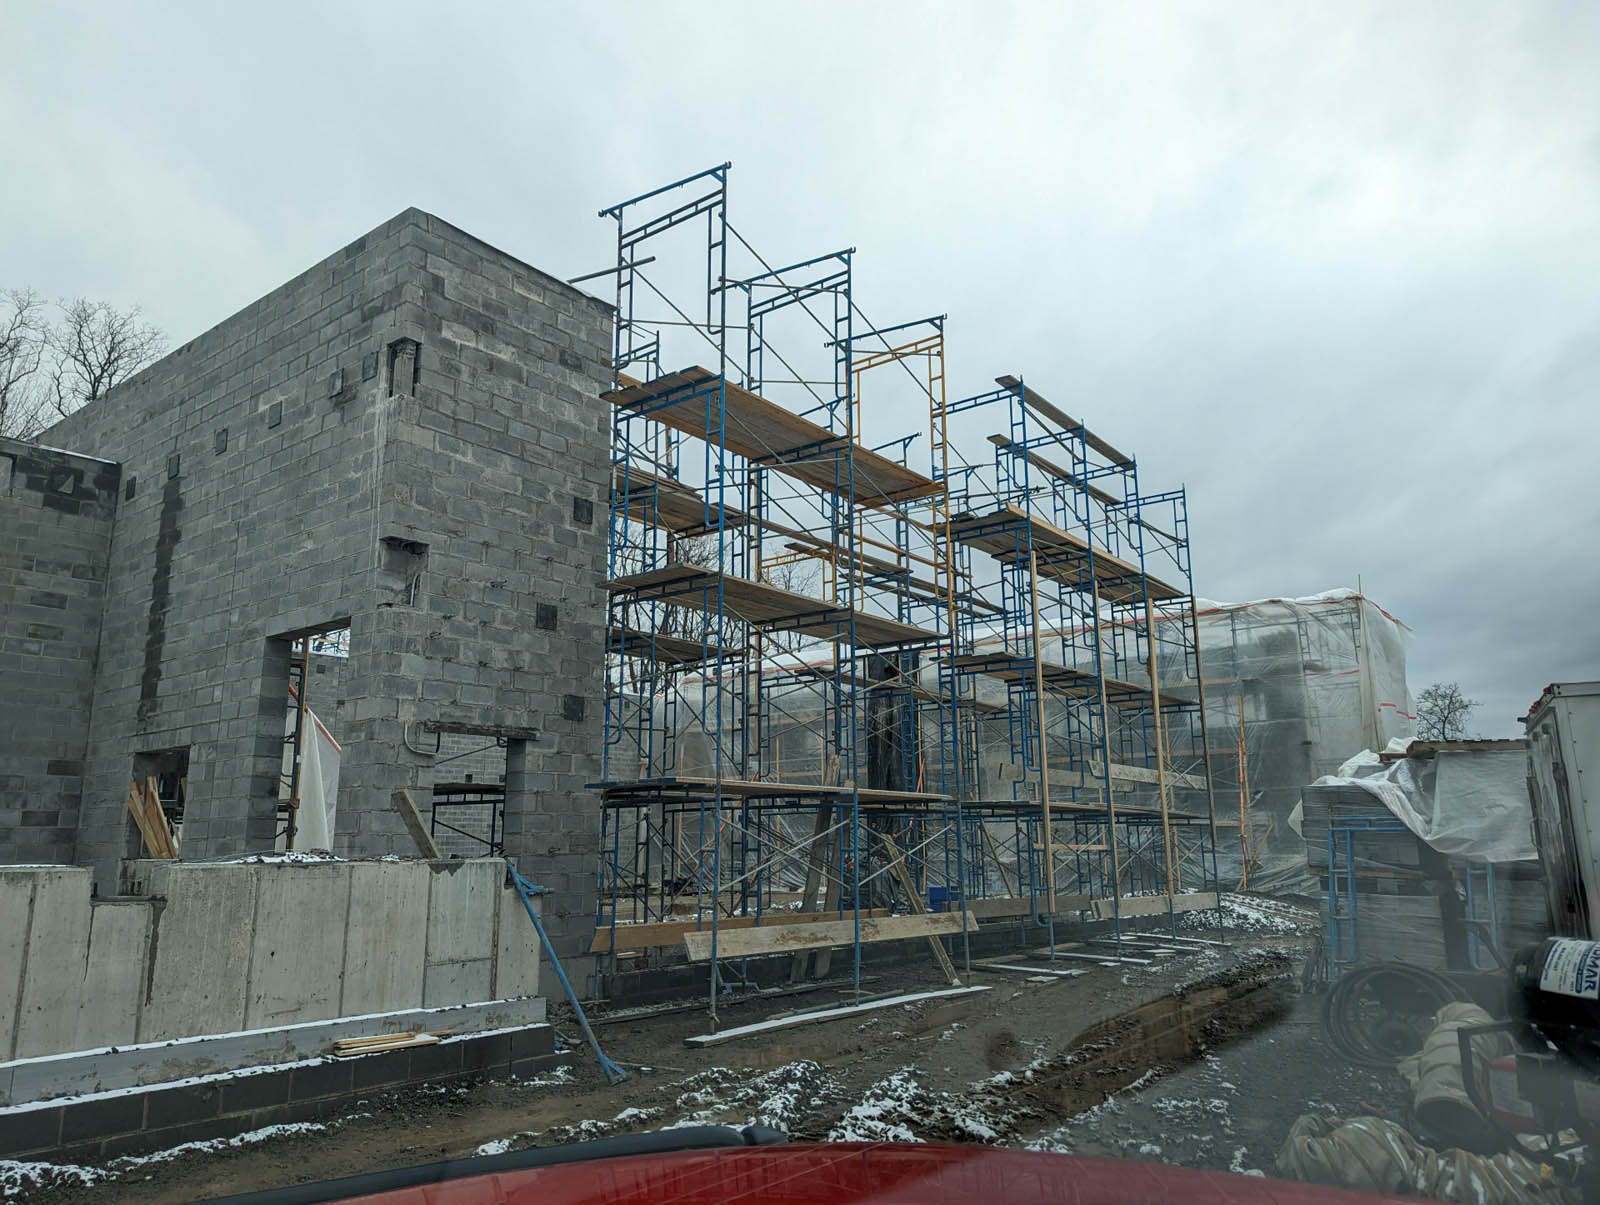 The Station 4 replacement continues to make headway with the west wall nearing completion